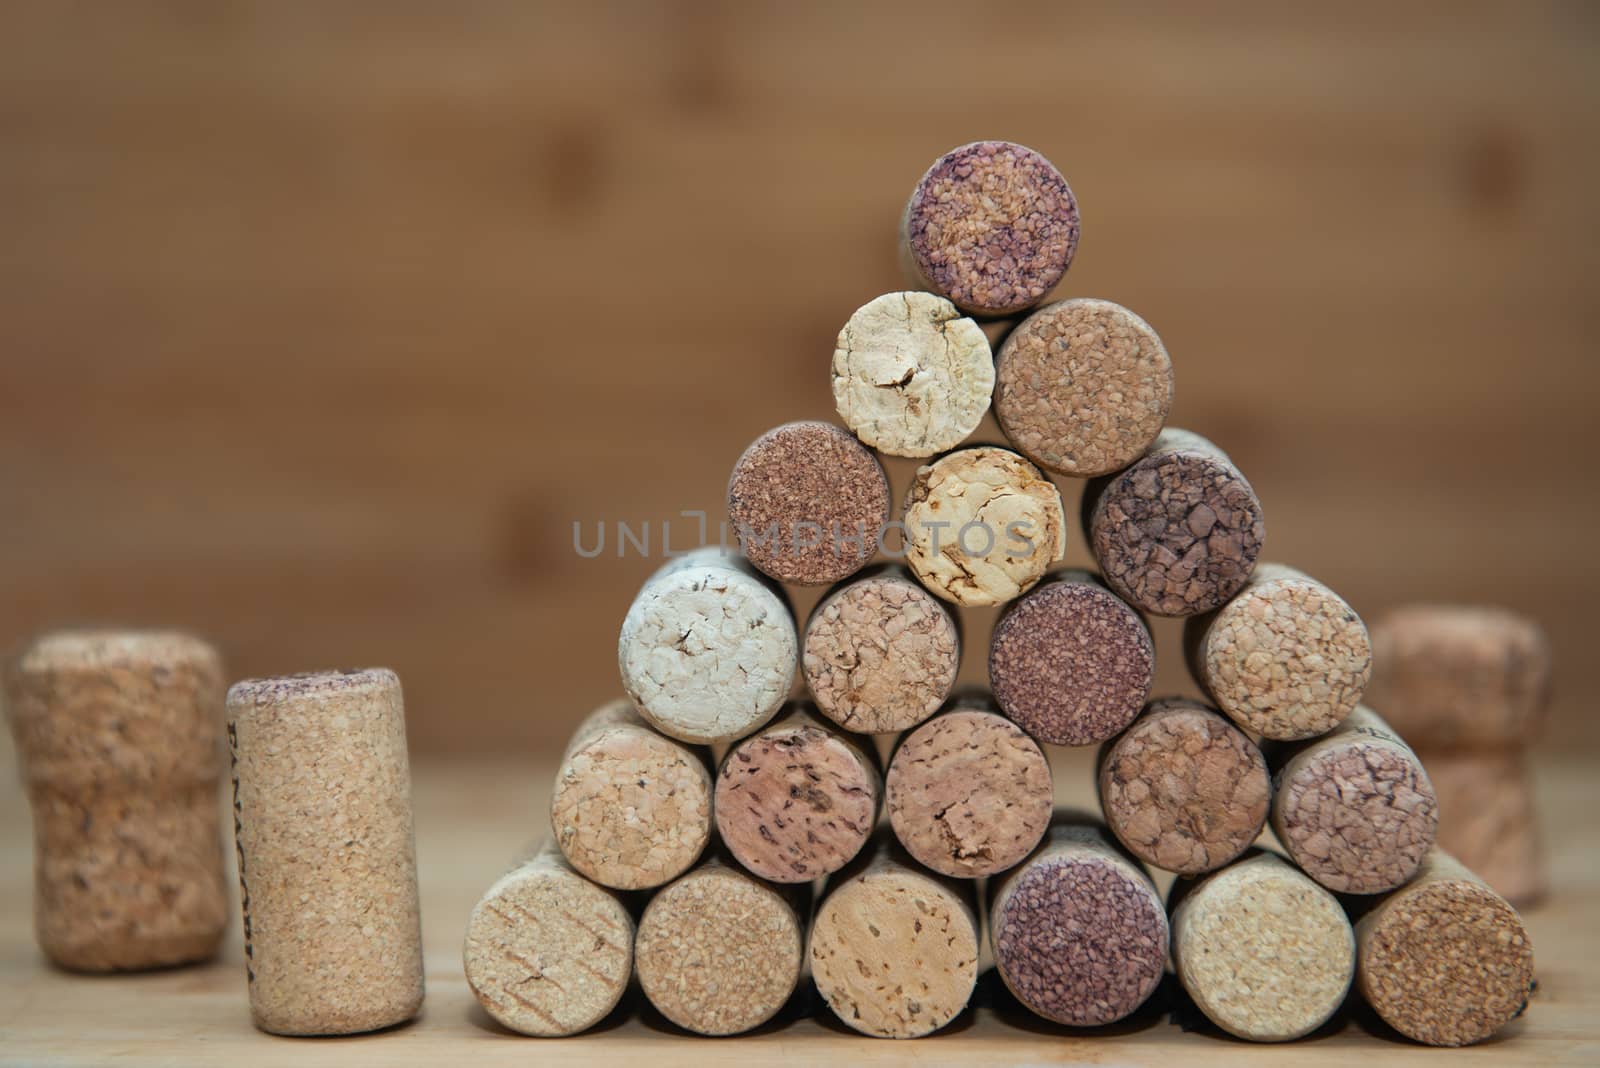 Heap of assorted wine corks on brick and wooden background.